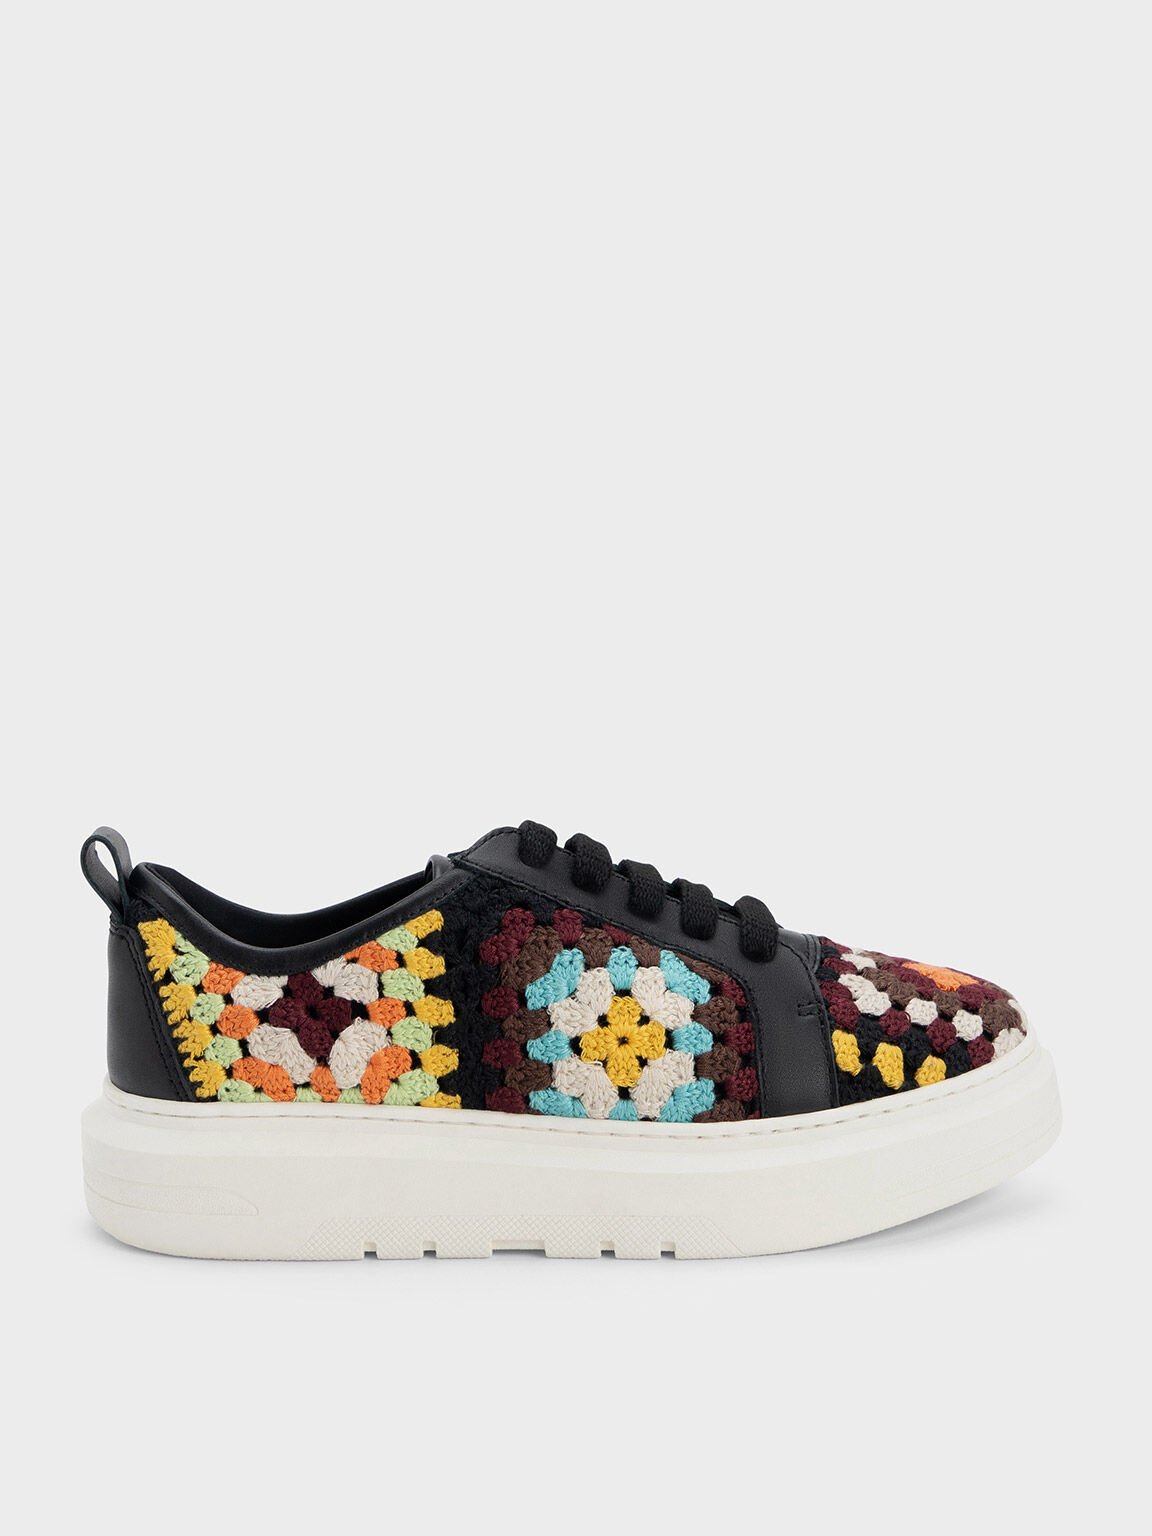 Fable Floral Crochet & Leather Sneakers, Multi, hi-res